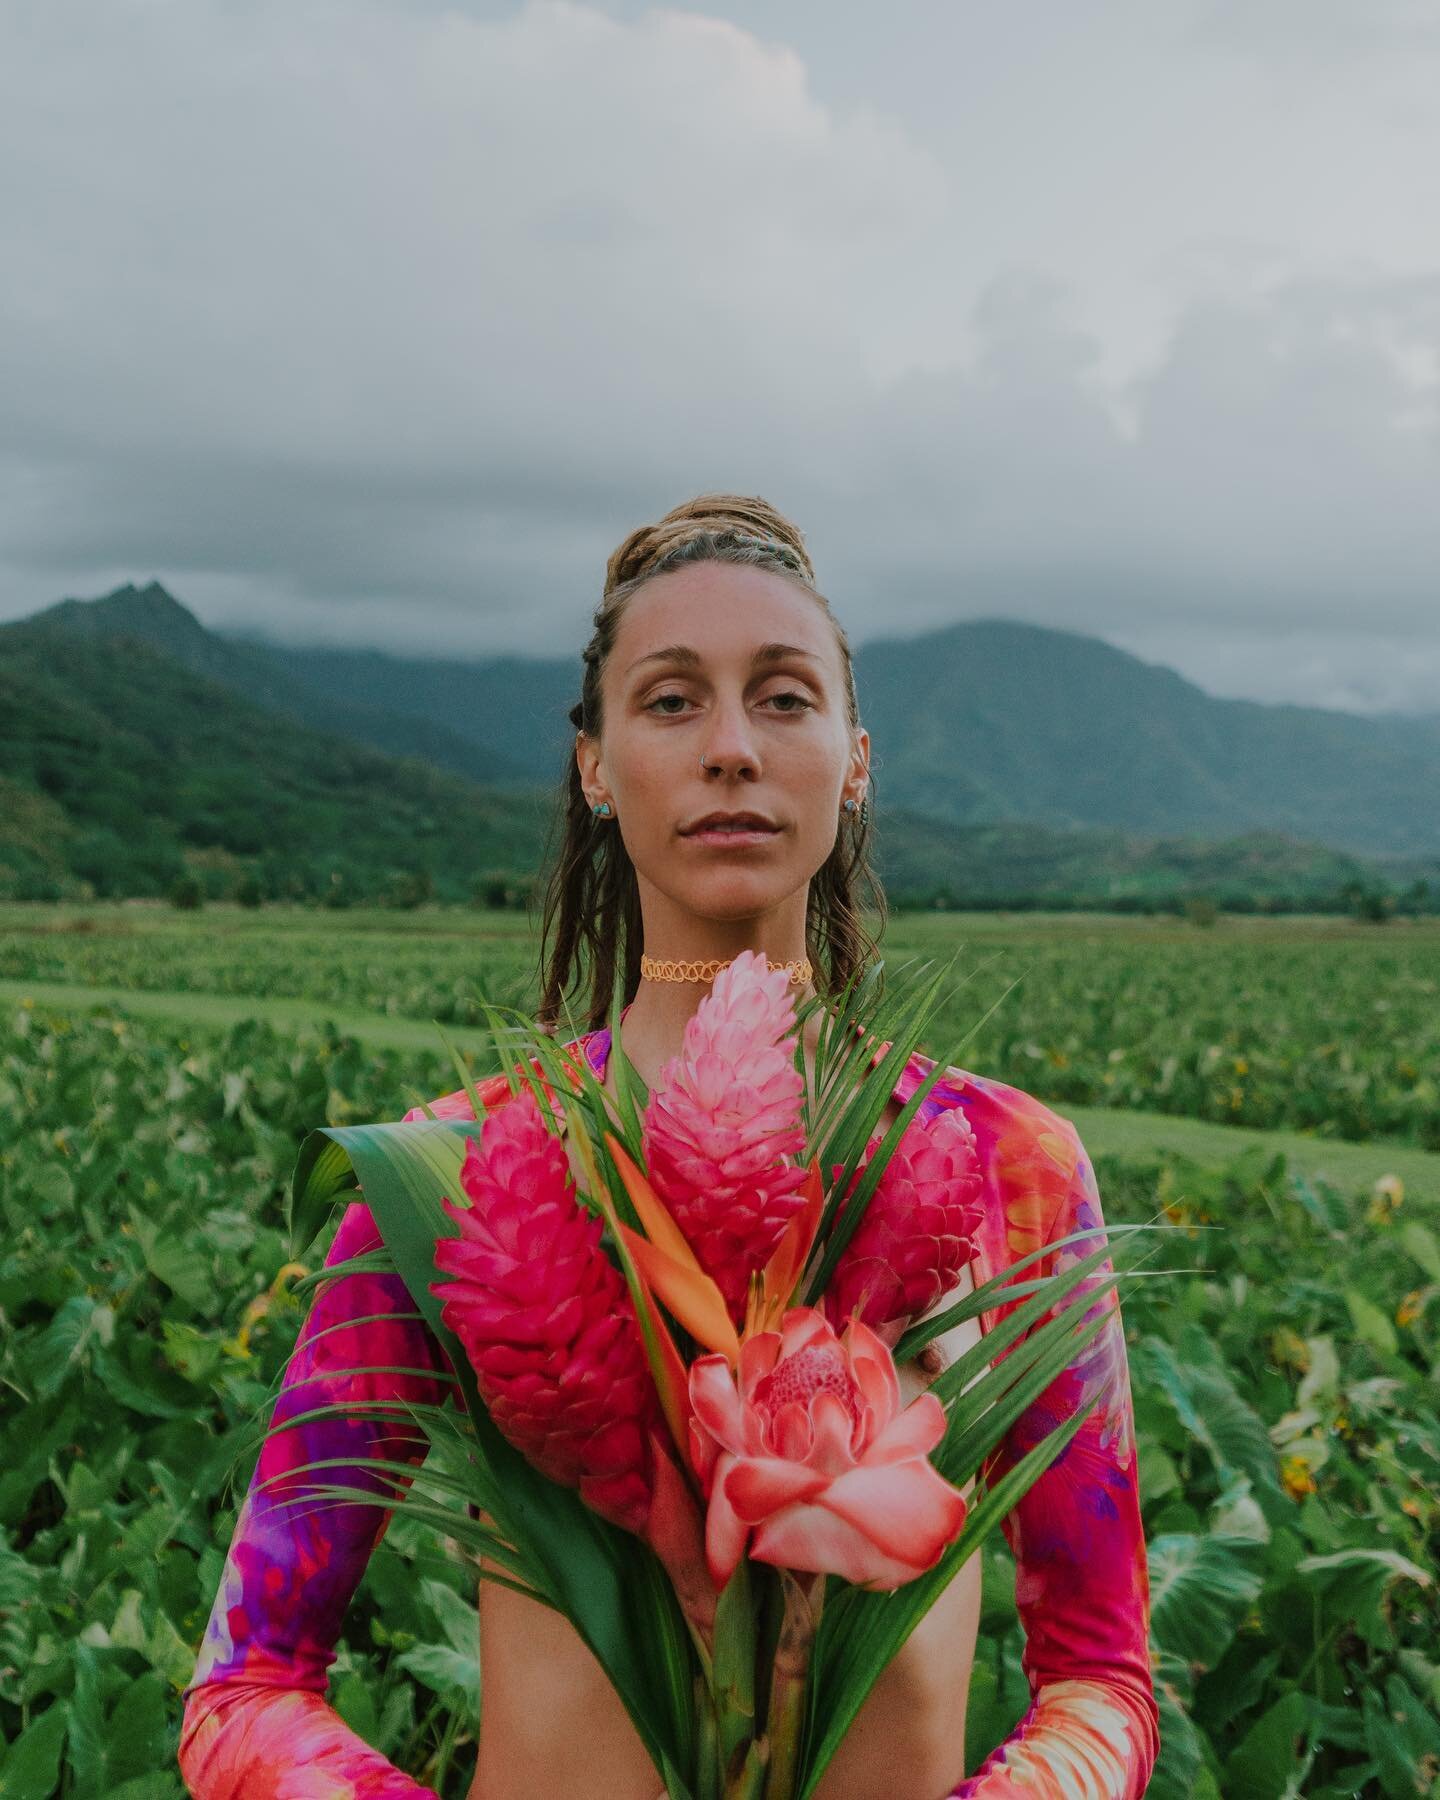 there&rsquo;s something so ancient and rich about the taro fields (kalo lo&rsquo;i). standing in over 1,000 years of history, culture, and spiritual significance, this timeless Hawaiian taro field not only serves as a food staple for feeding the isla